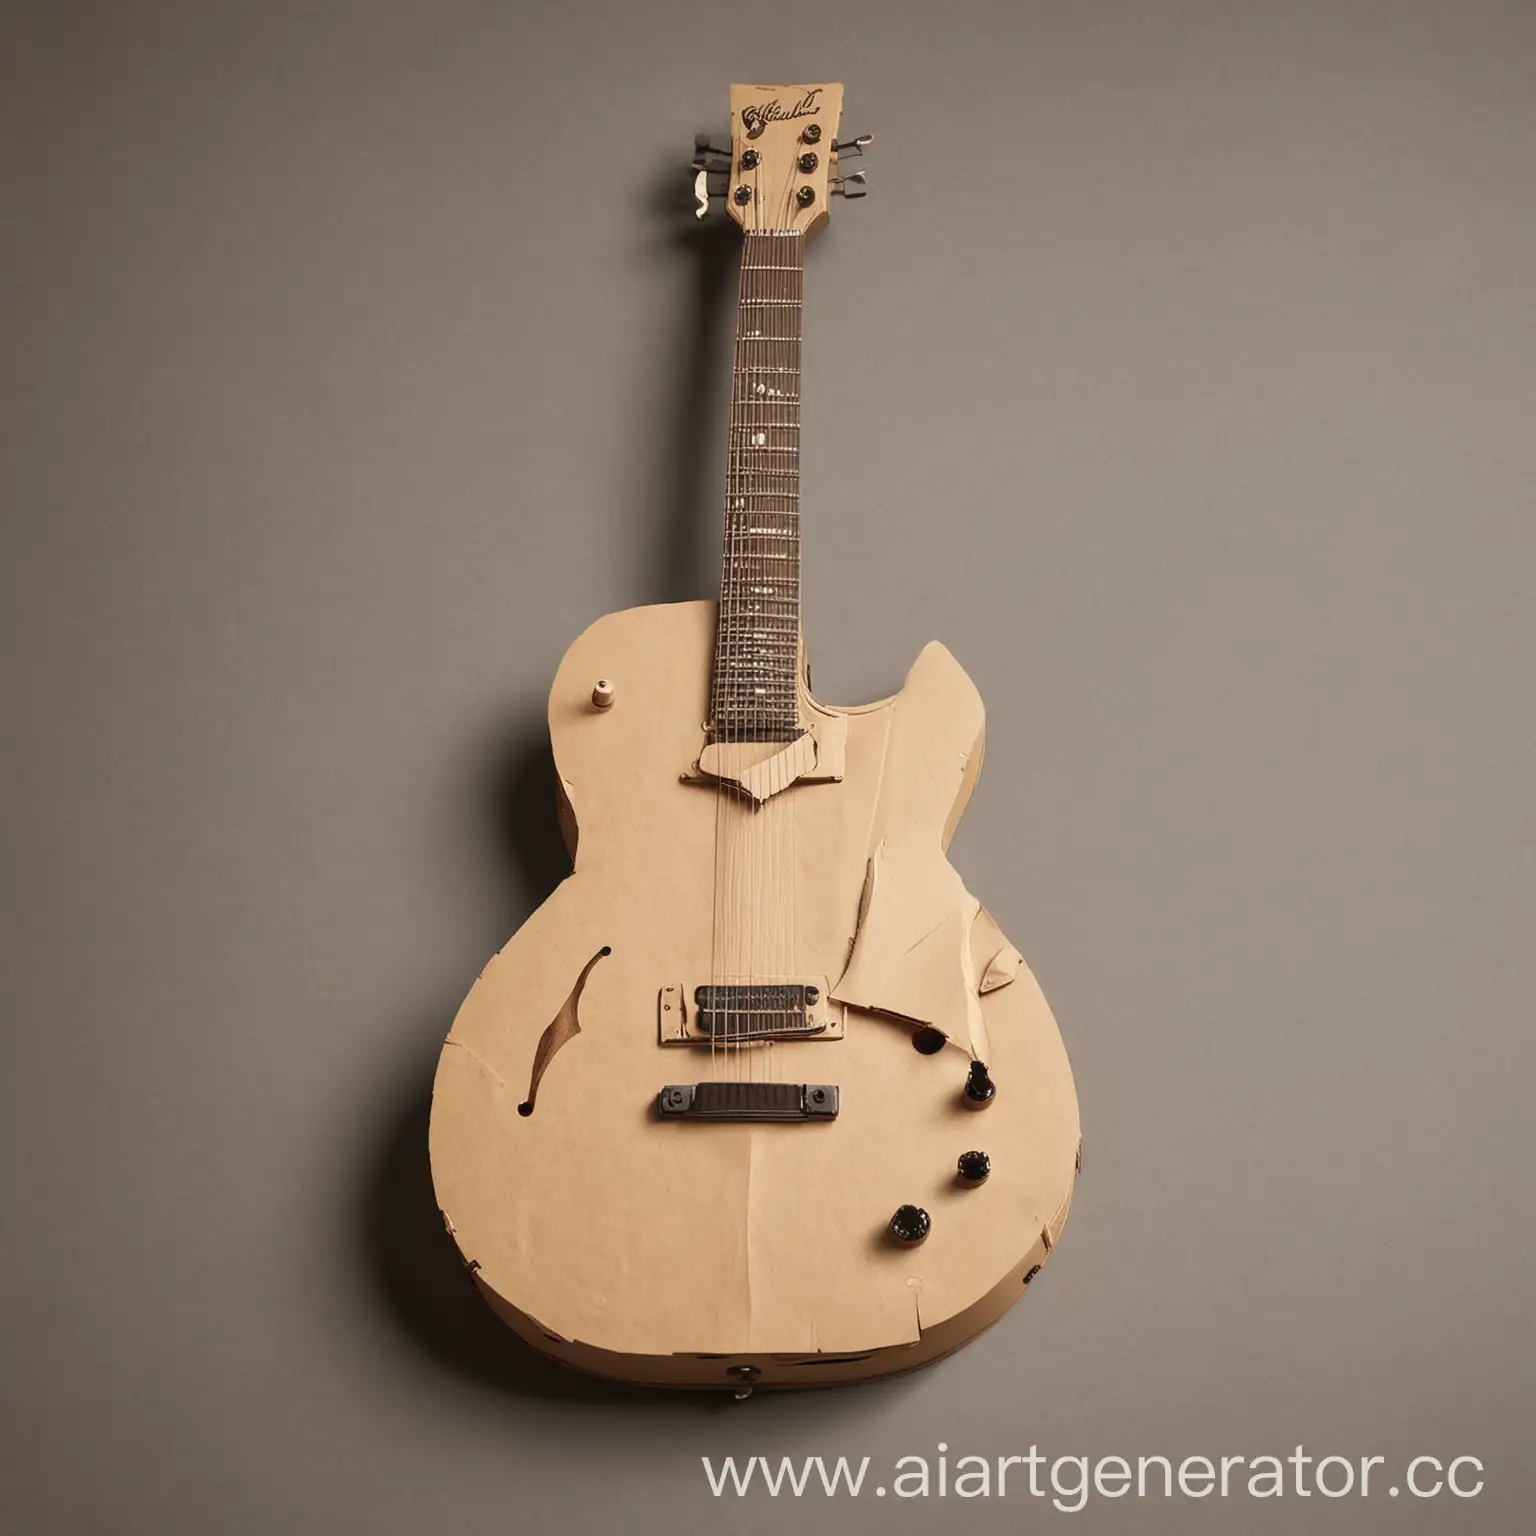 Handcrafted-Paper-Guitar-A-Realistic-Artistic-Rendering